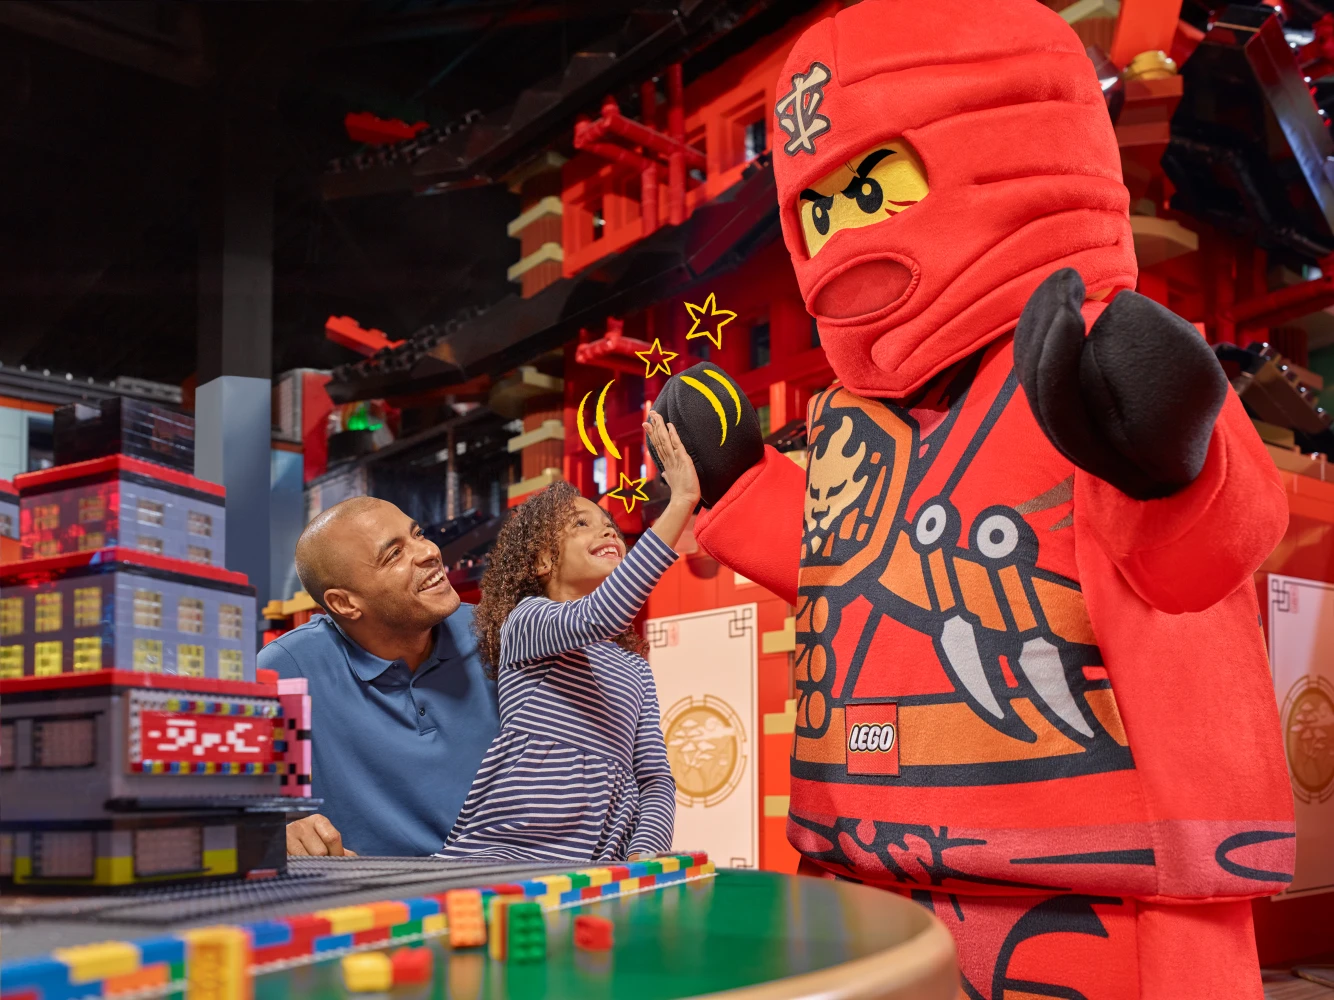 LEGOLAND® Discovery Center New Jersey: What to expect - 2